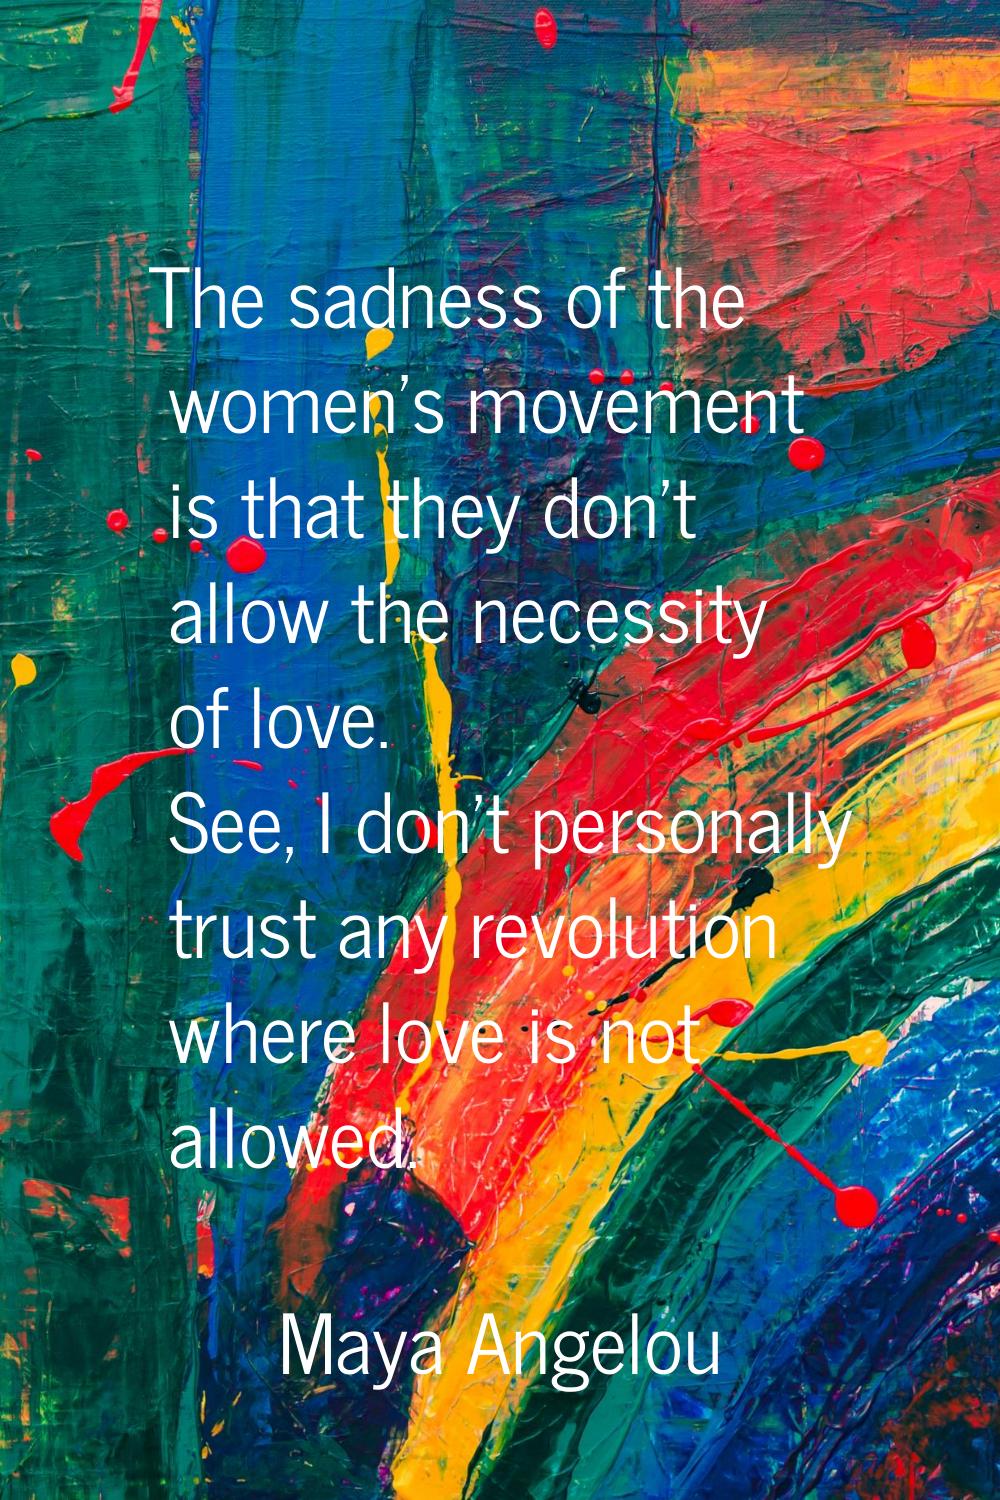 The sadness of the women's movement is that they don't allow the necessity of love. See, I don't pe